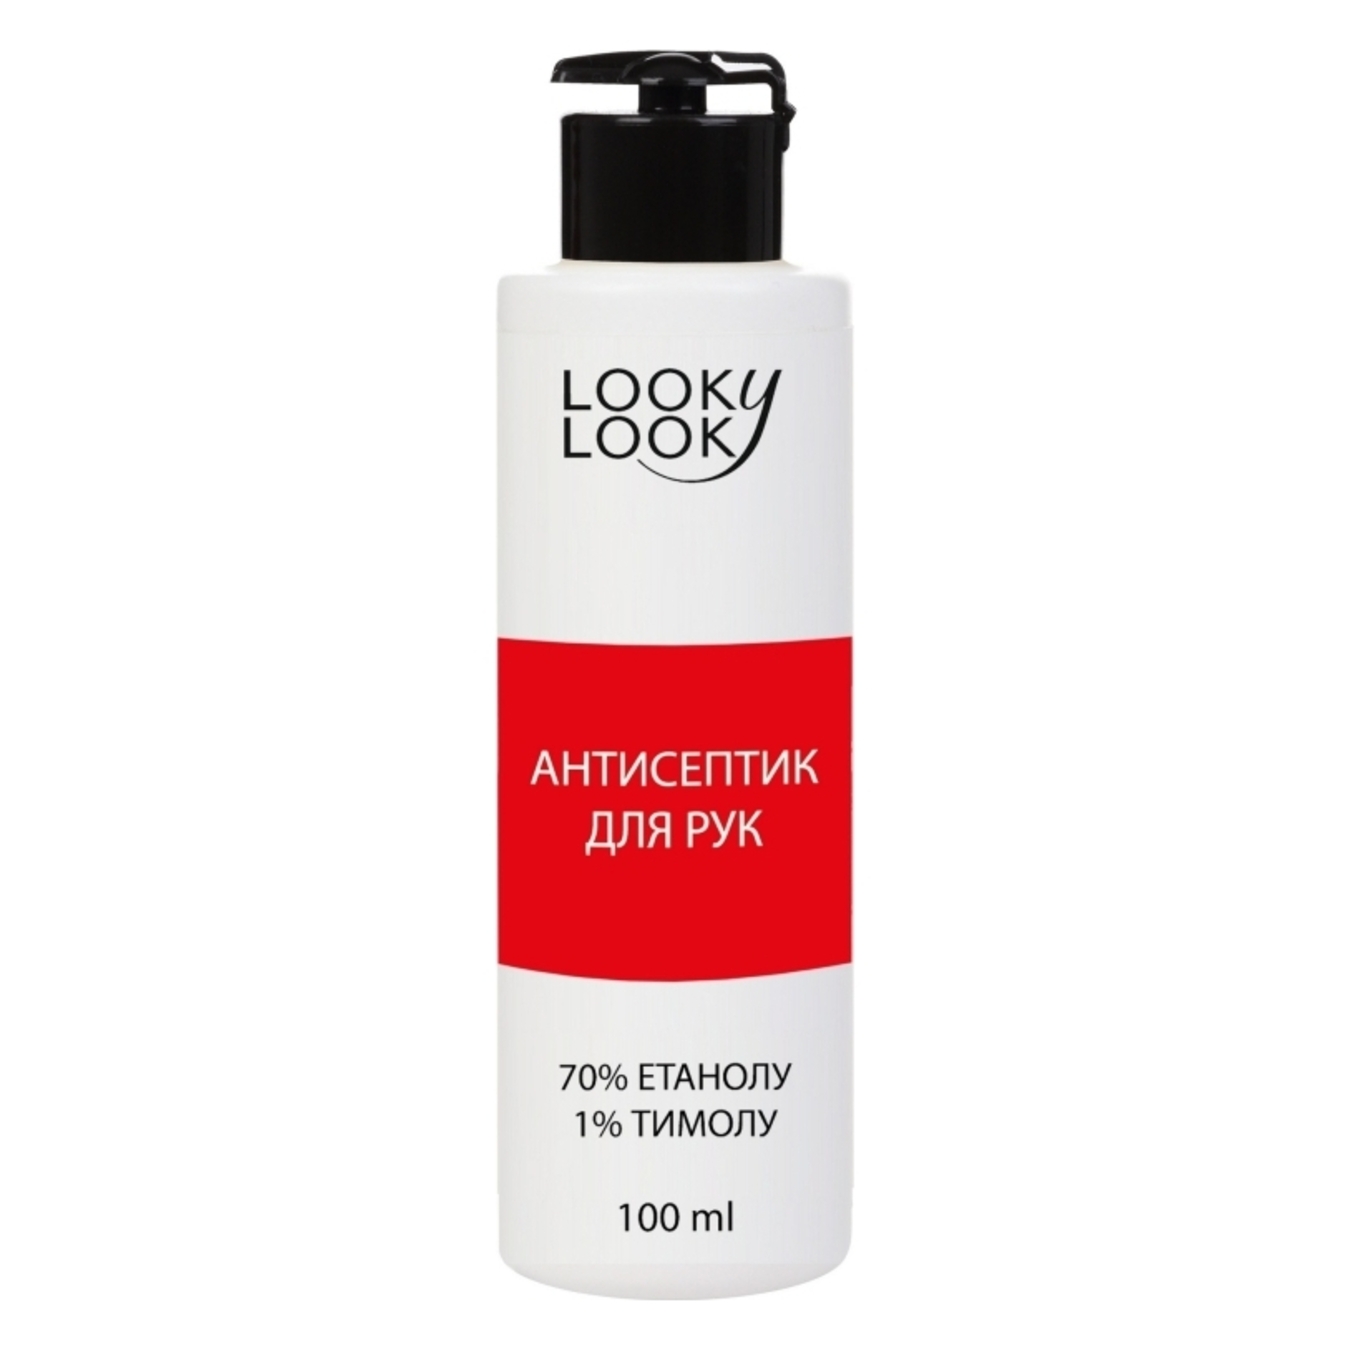 Looky Look antiseptic for hands 100 ml